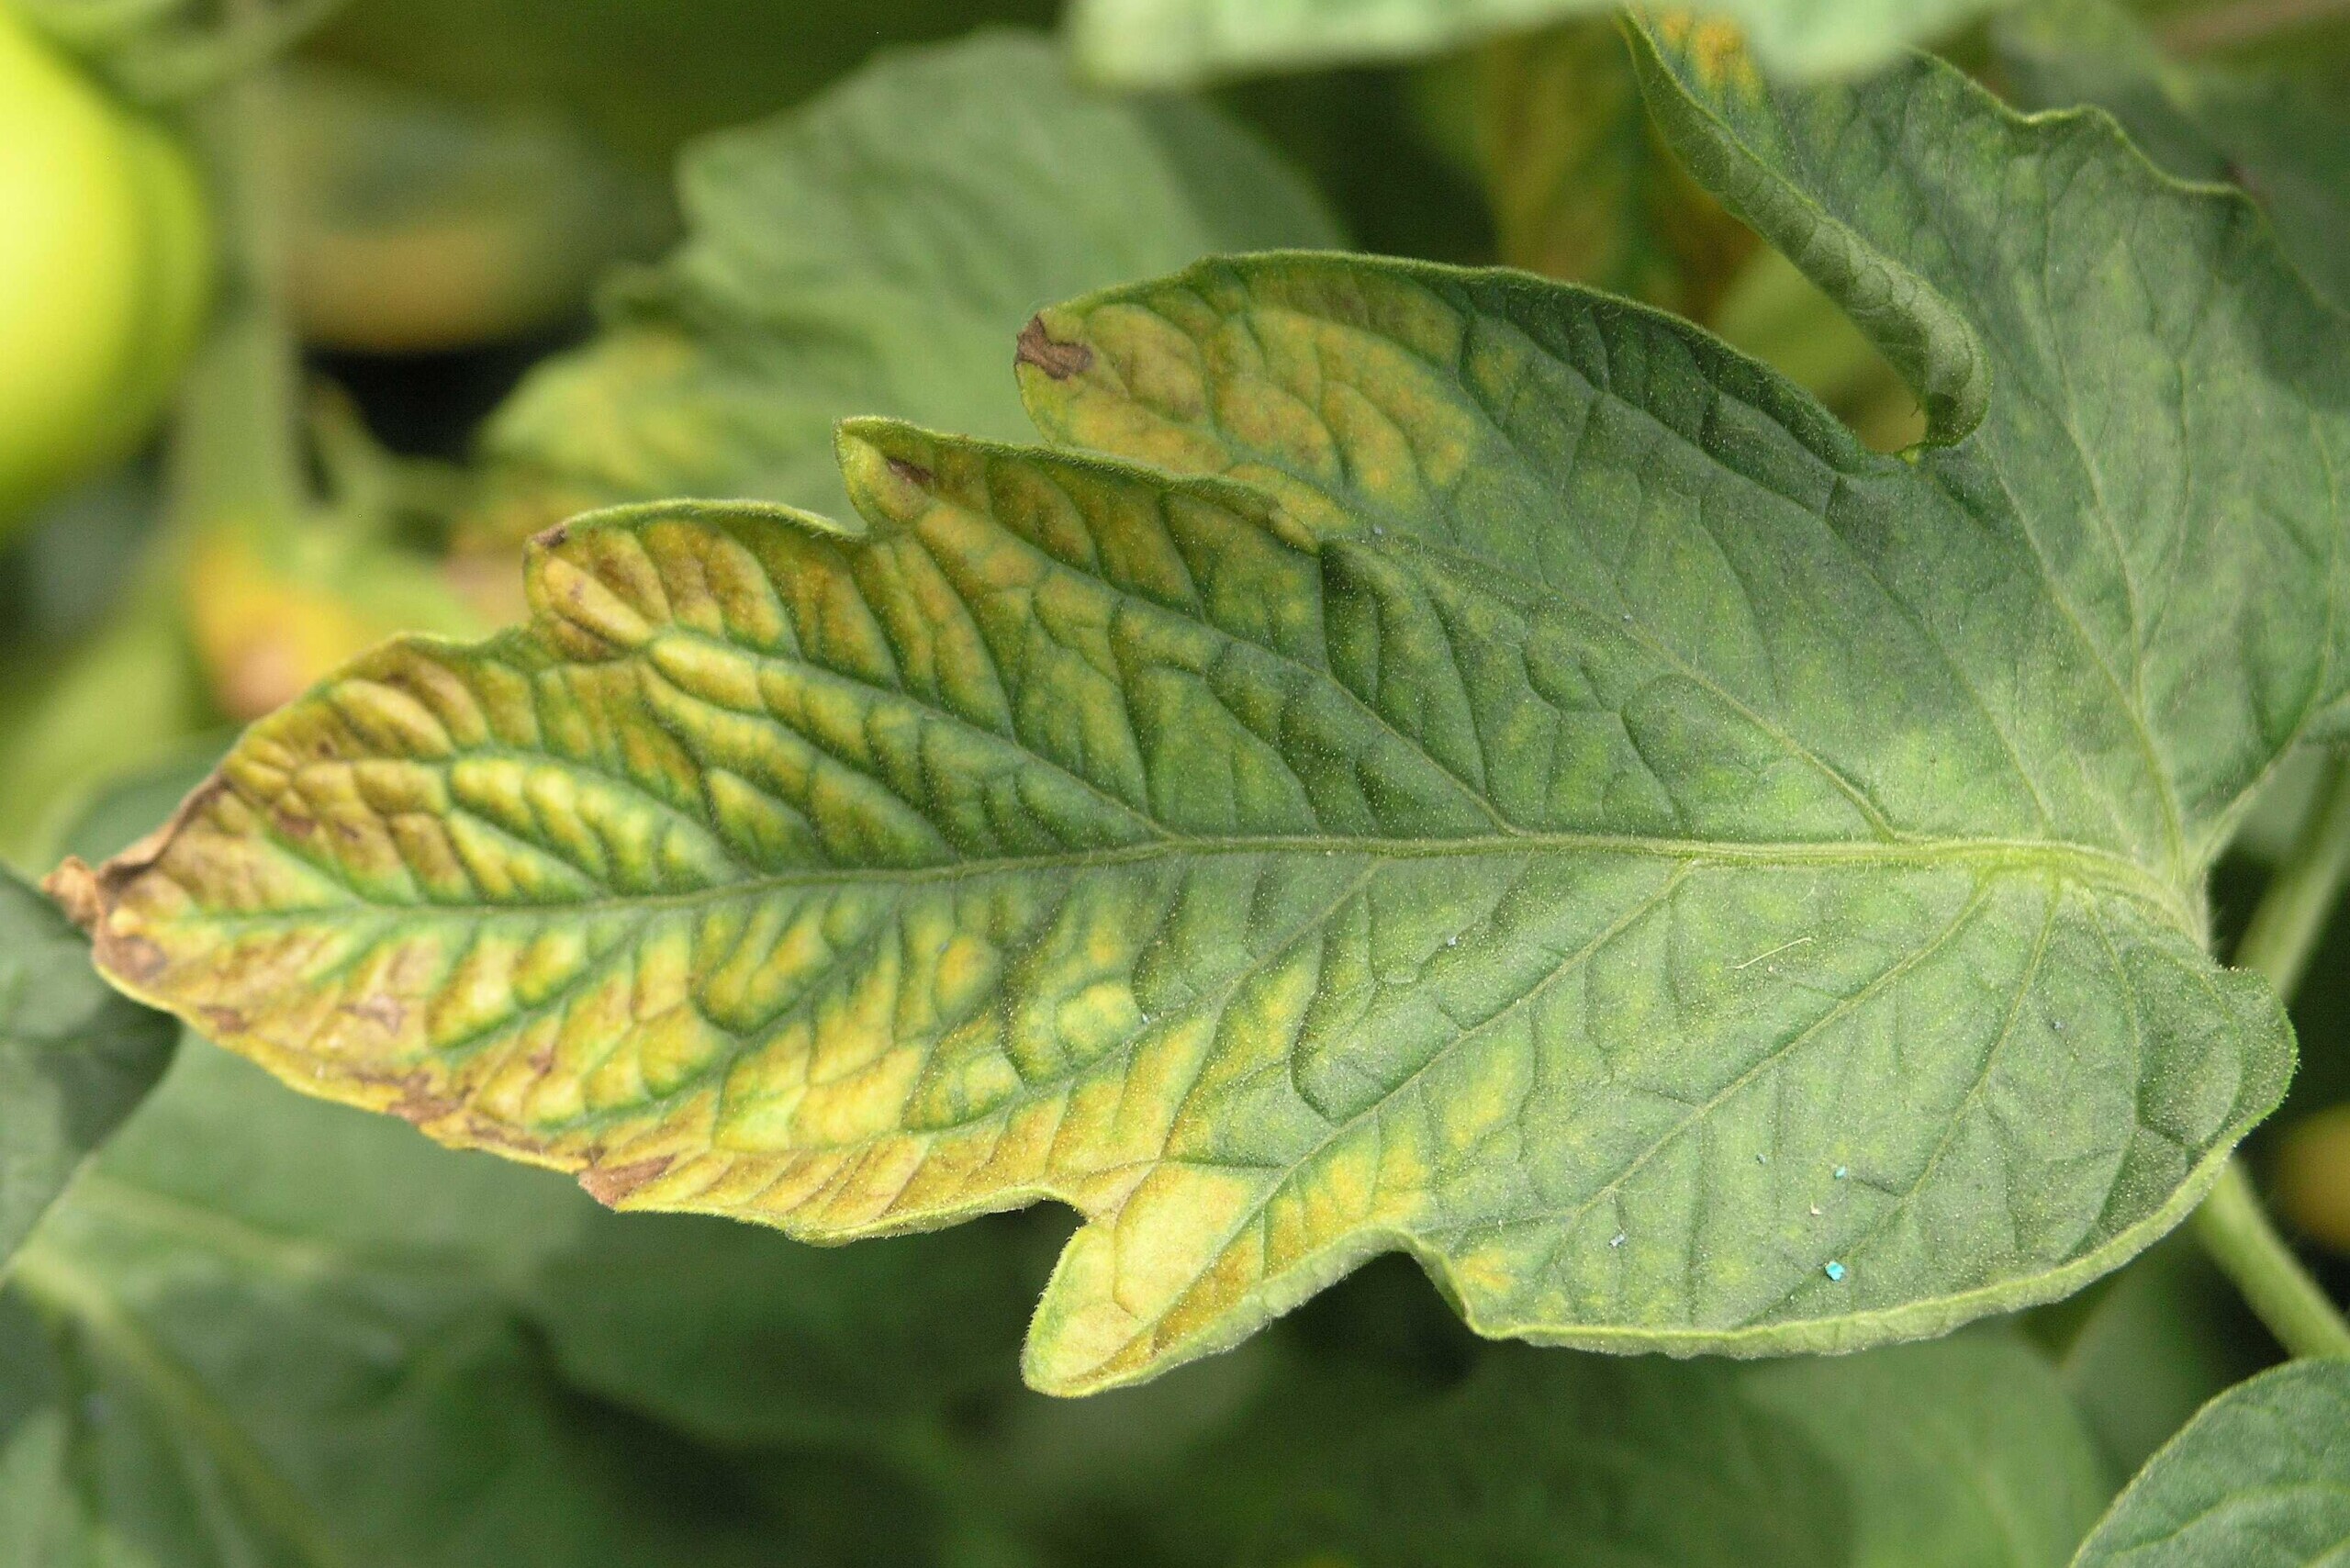 Dealing with Plant Diseases